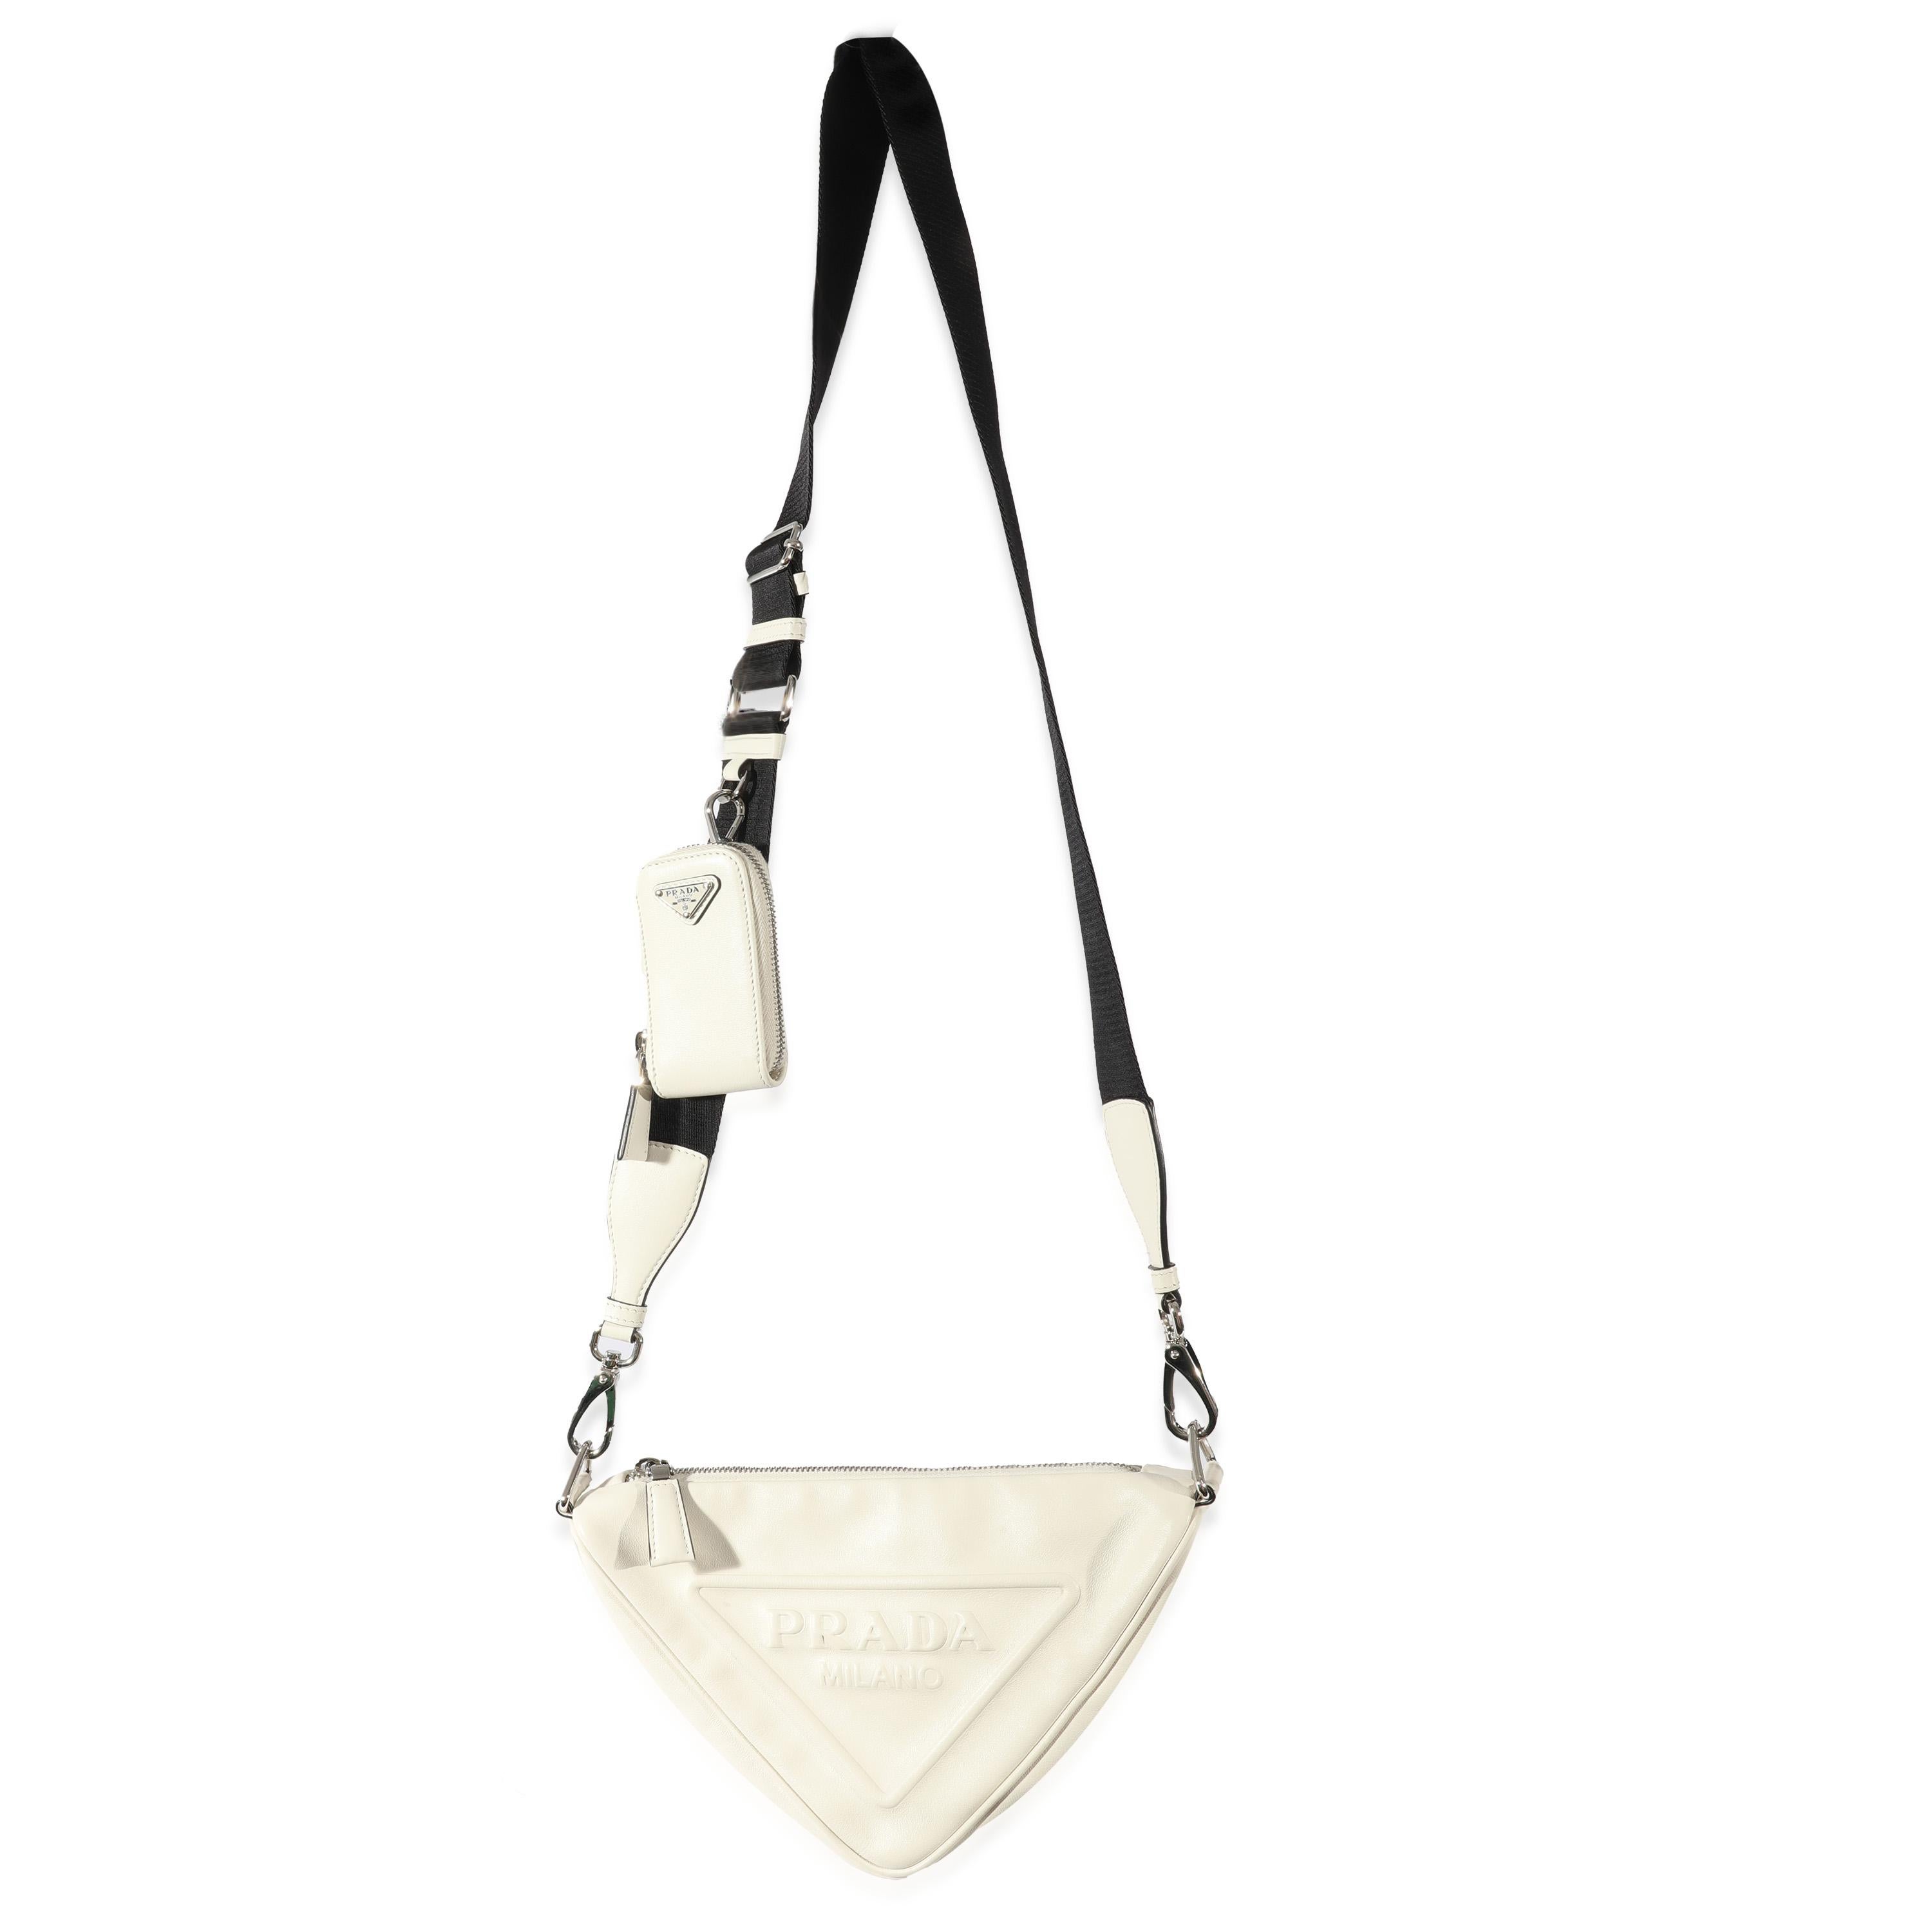 Listing Title: Prada White Leather Triangle Crossbody Bag
 SKU: 128615
 MSRP: 2500.00
 Condition: Pre-owned 
 Handbag Condition: Very Good
 Condition Comments: Very Good Condition. Discoloration and marks to leather. Hairline scratching to hardware.